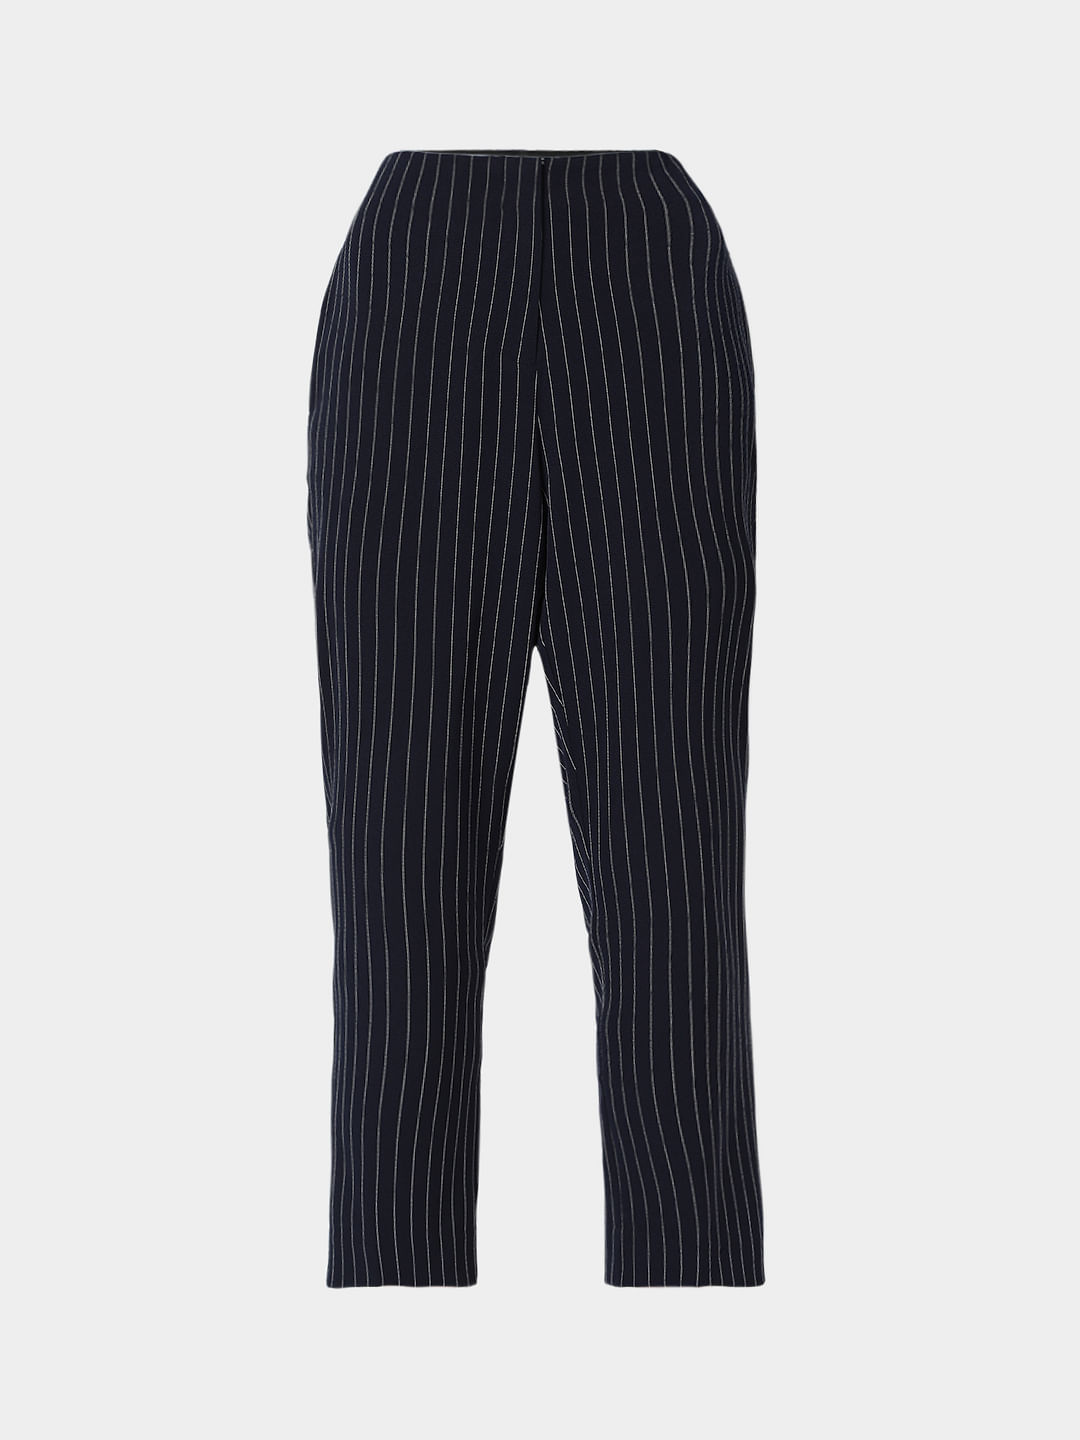 BALLAD LINED TROUSERS – STRIPES GREY | SHOOP Clothing